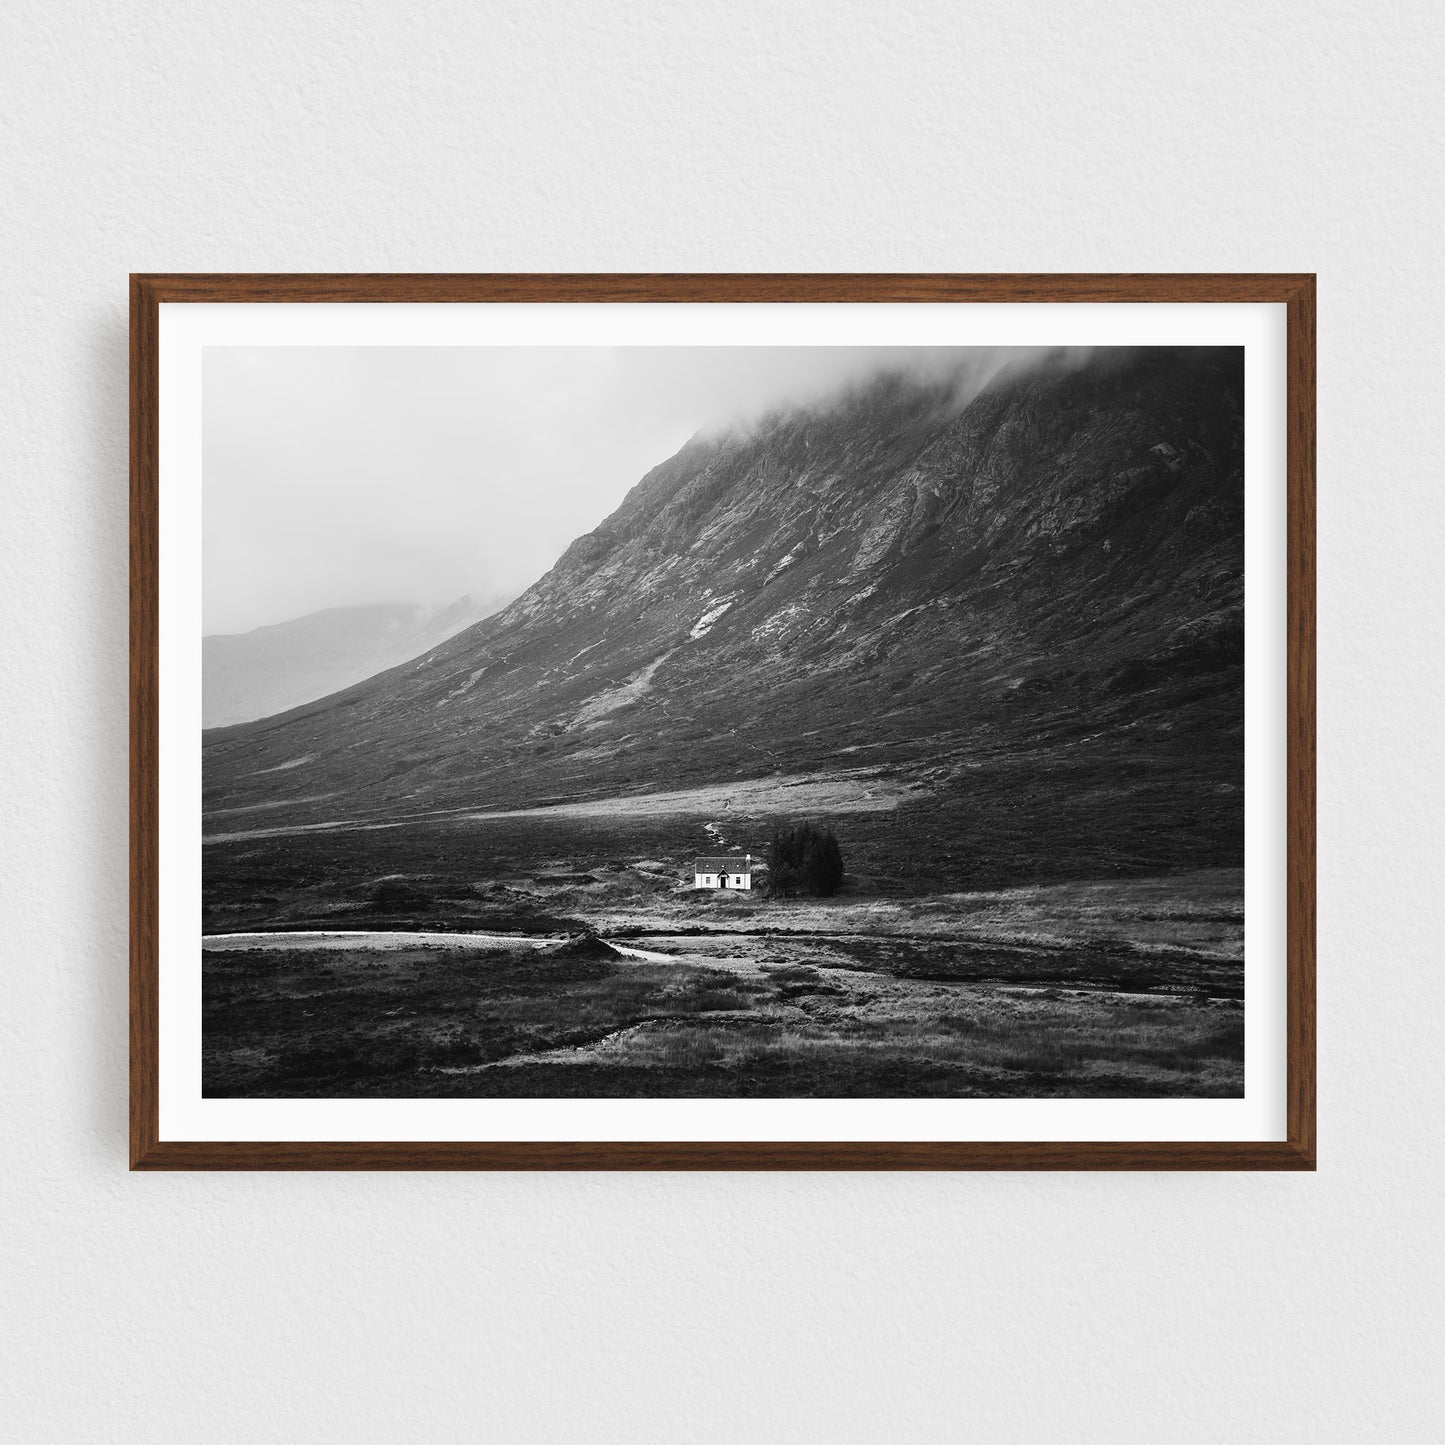 The Lonely White Cottage of Glencoe (B&W)